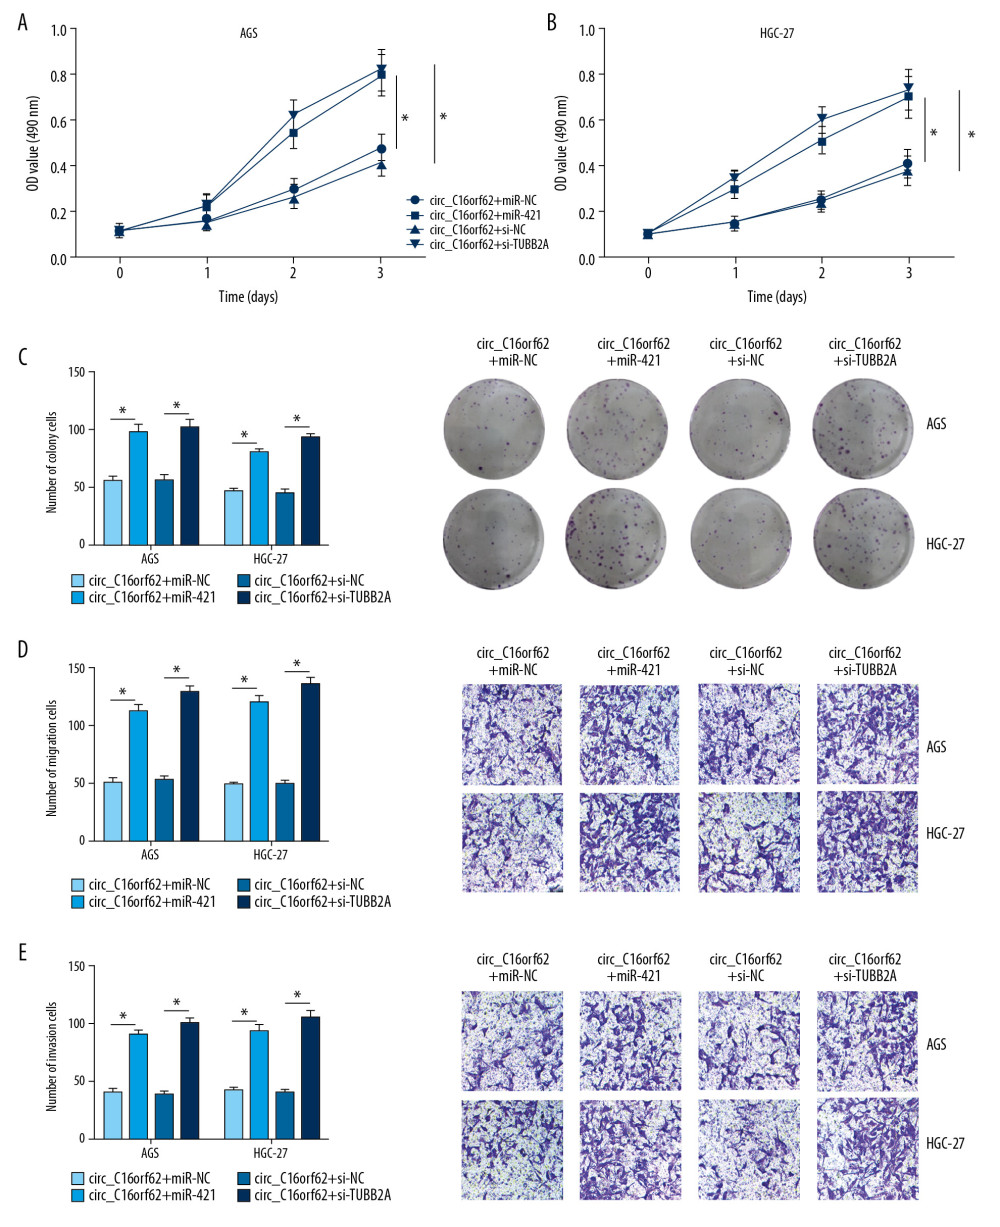 Circ_C16orf62 hindered tumor progression by miR-421/TUBB2A axis in GC cells. (A–C) Proliferation analysis was performed by MTT and colony formation assays in AGS and HGC-27 cells transfected with circ_C16orf62+ miR-NC, circ_C16orf62+ miR-421, circ_C16orf62+ si-NC and circ_C16orf62+si-TUBB2A. (D, E) The analysis of migration and invasion was carried out by using transwell assay in transfected AGS and HGC-27 cells. * P<0.05.